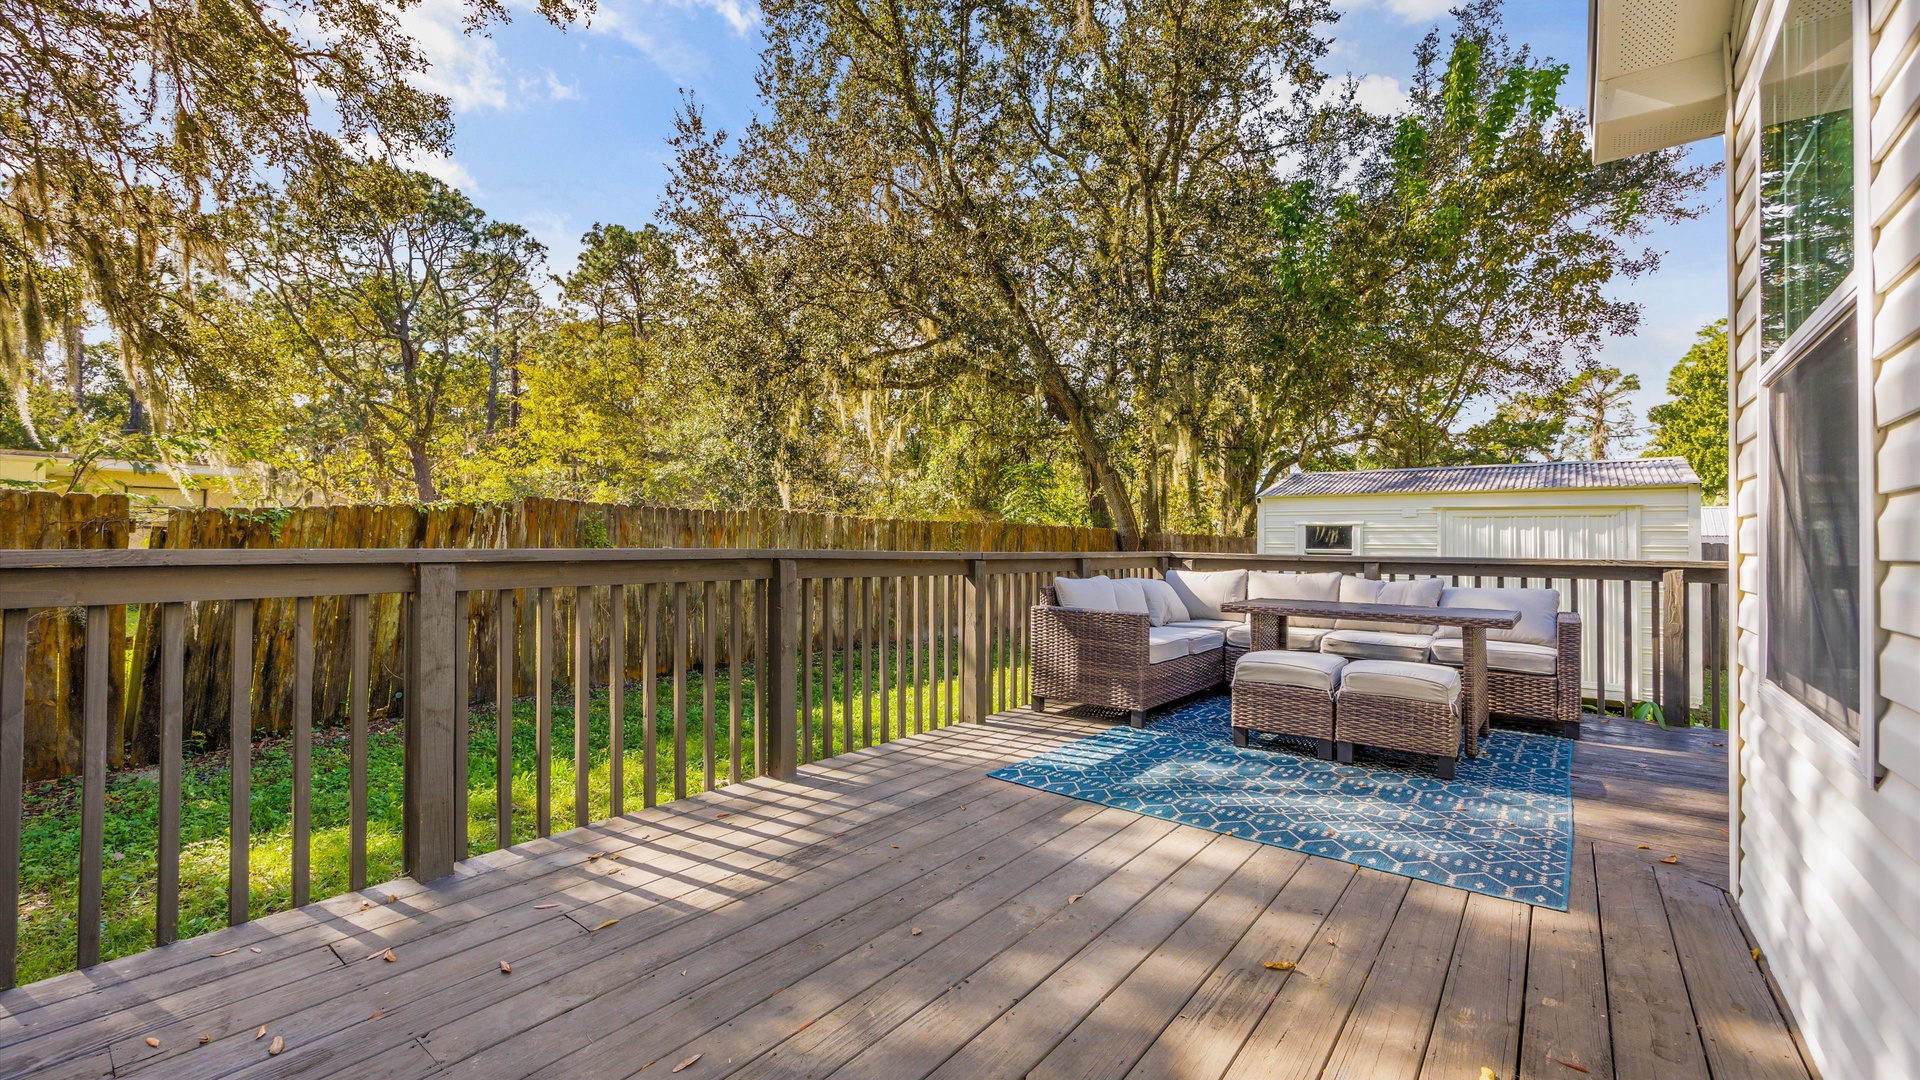 Step out onto the sunny back deck & lounge the day away in the fresh air